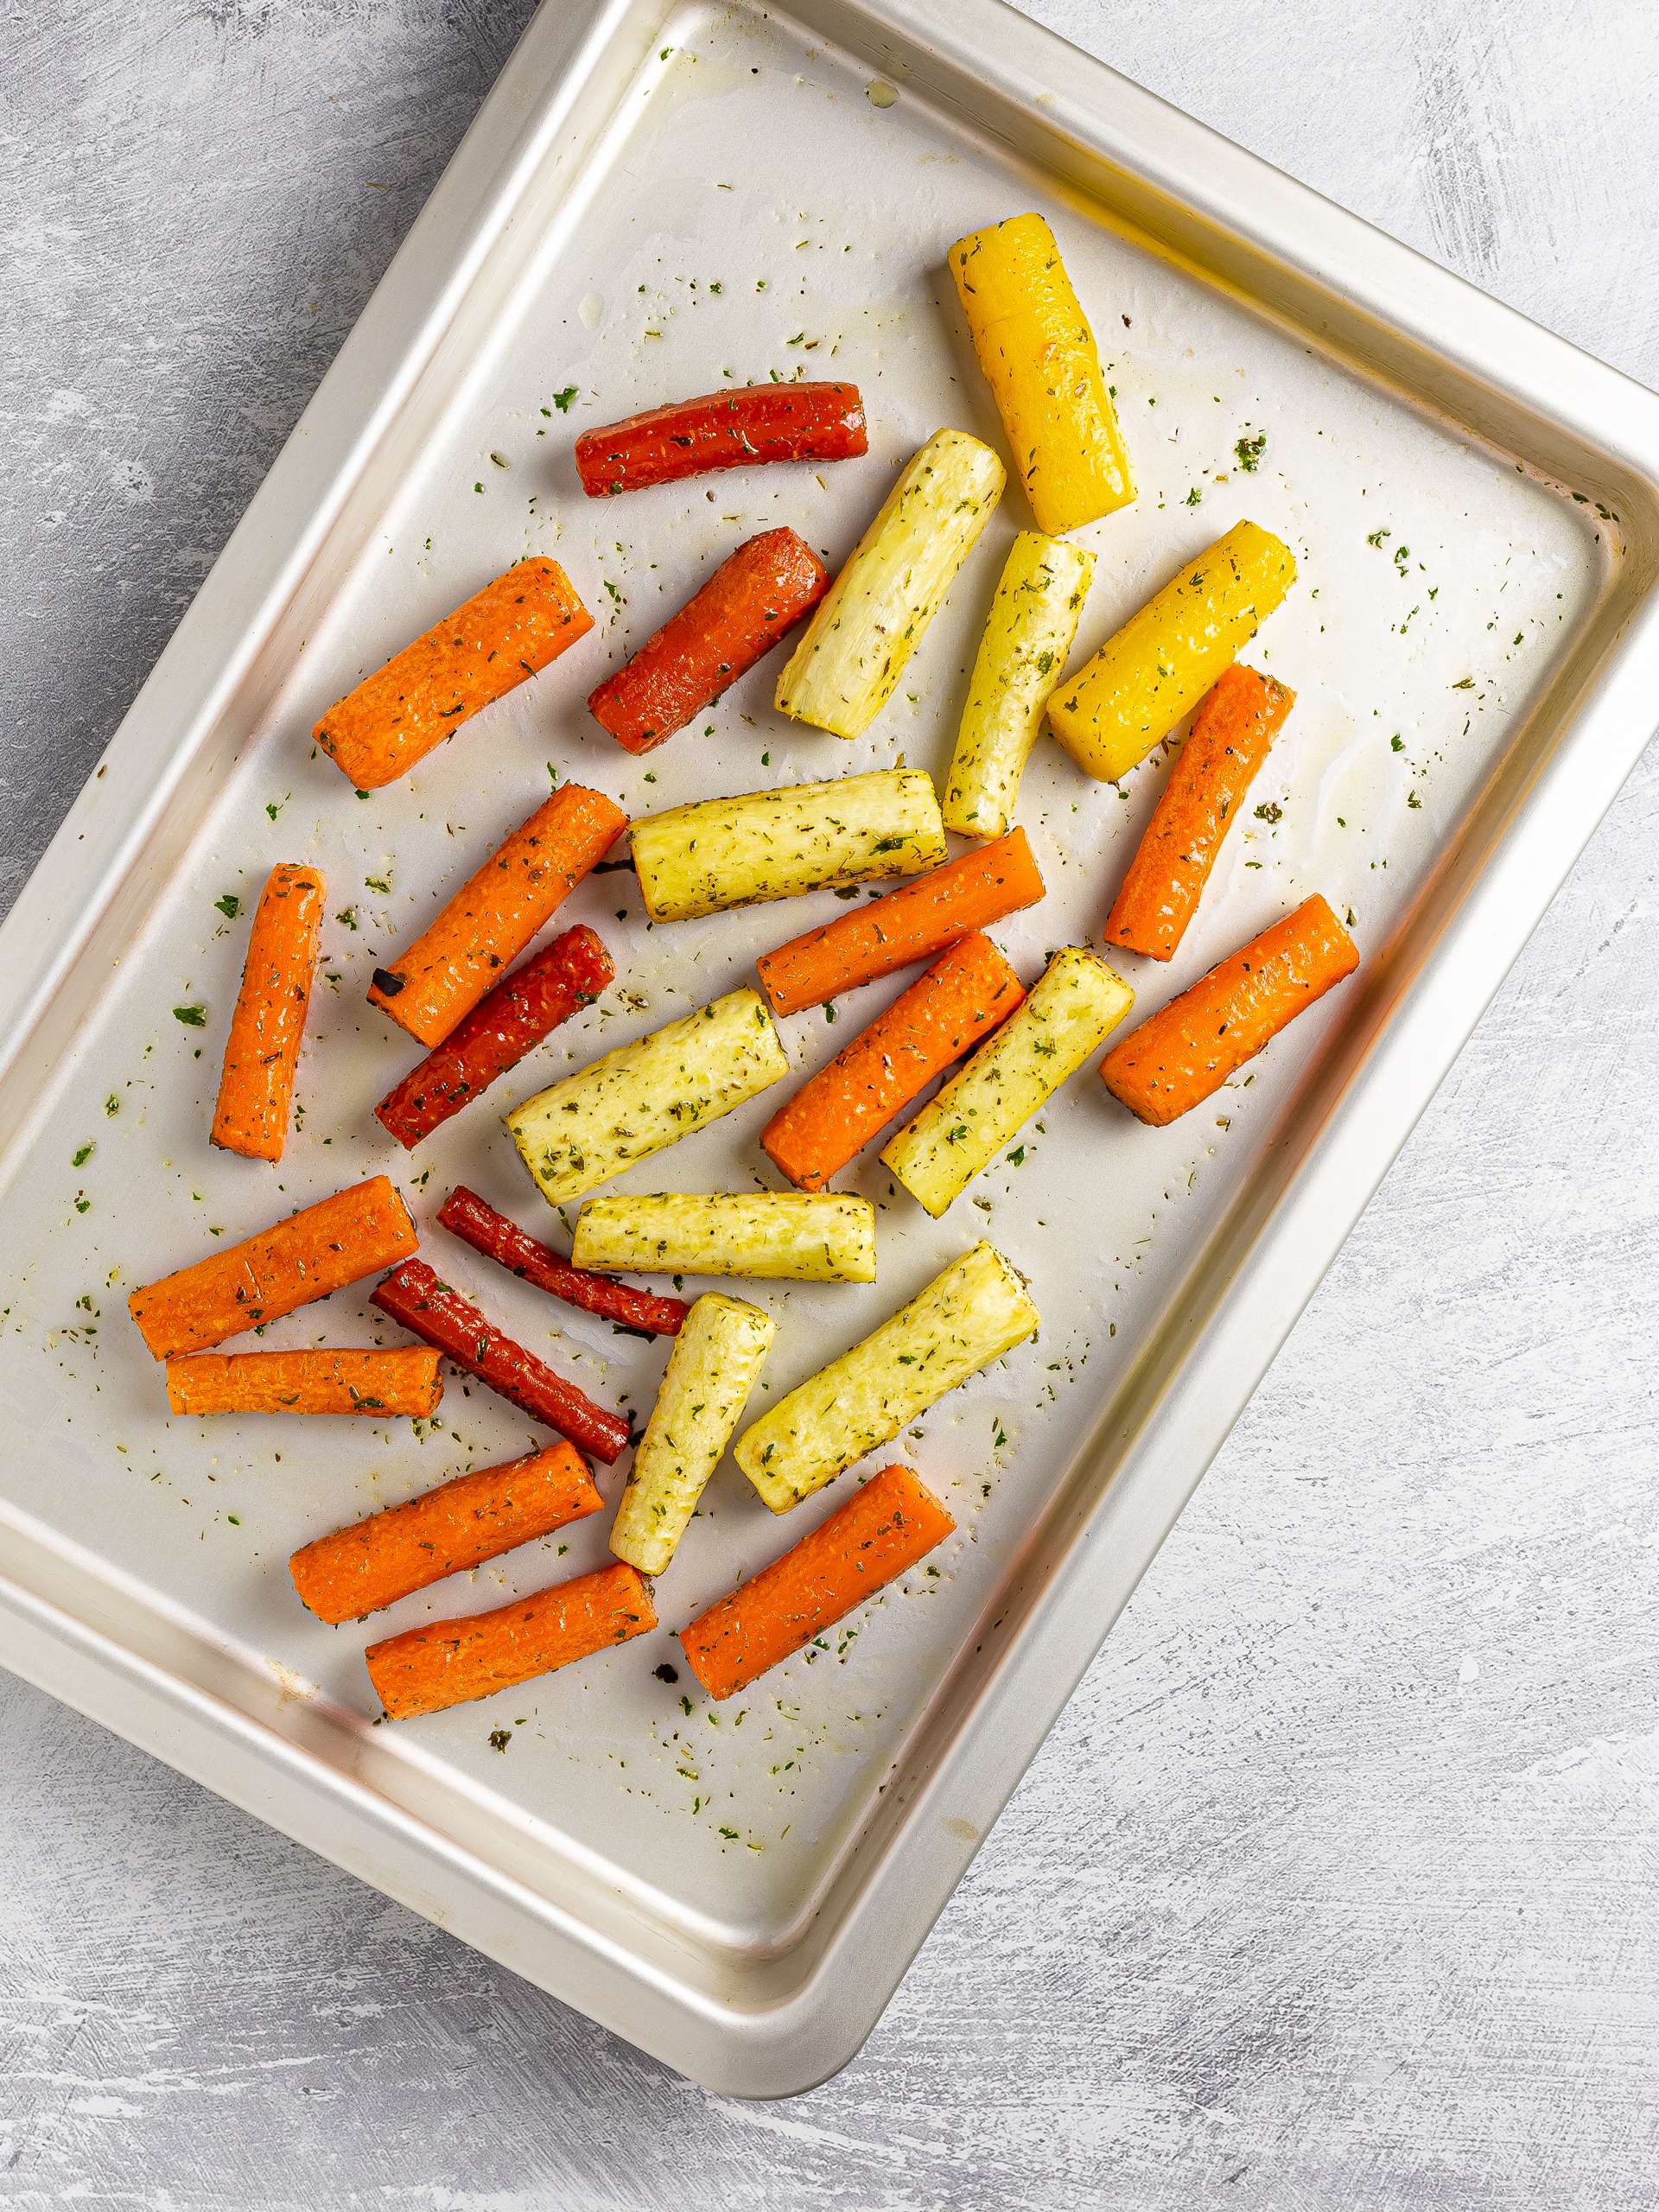 roasted carrots and parsnips